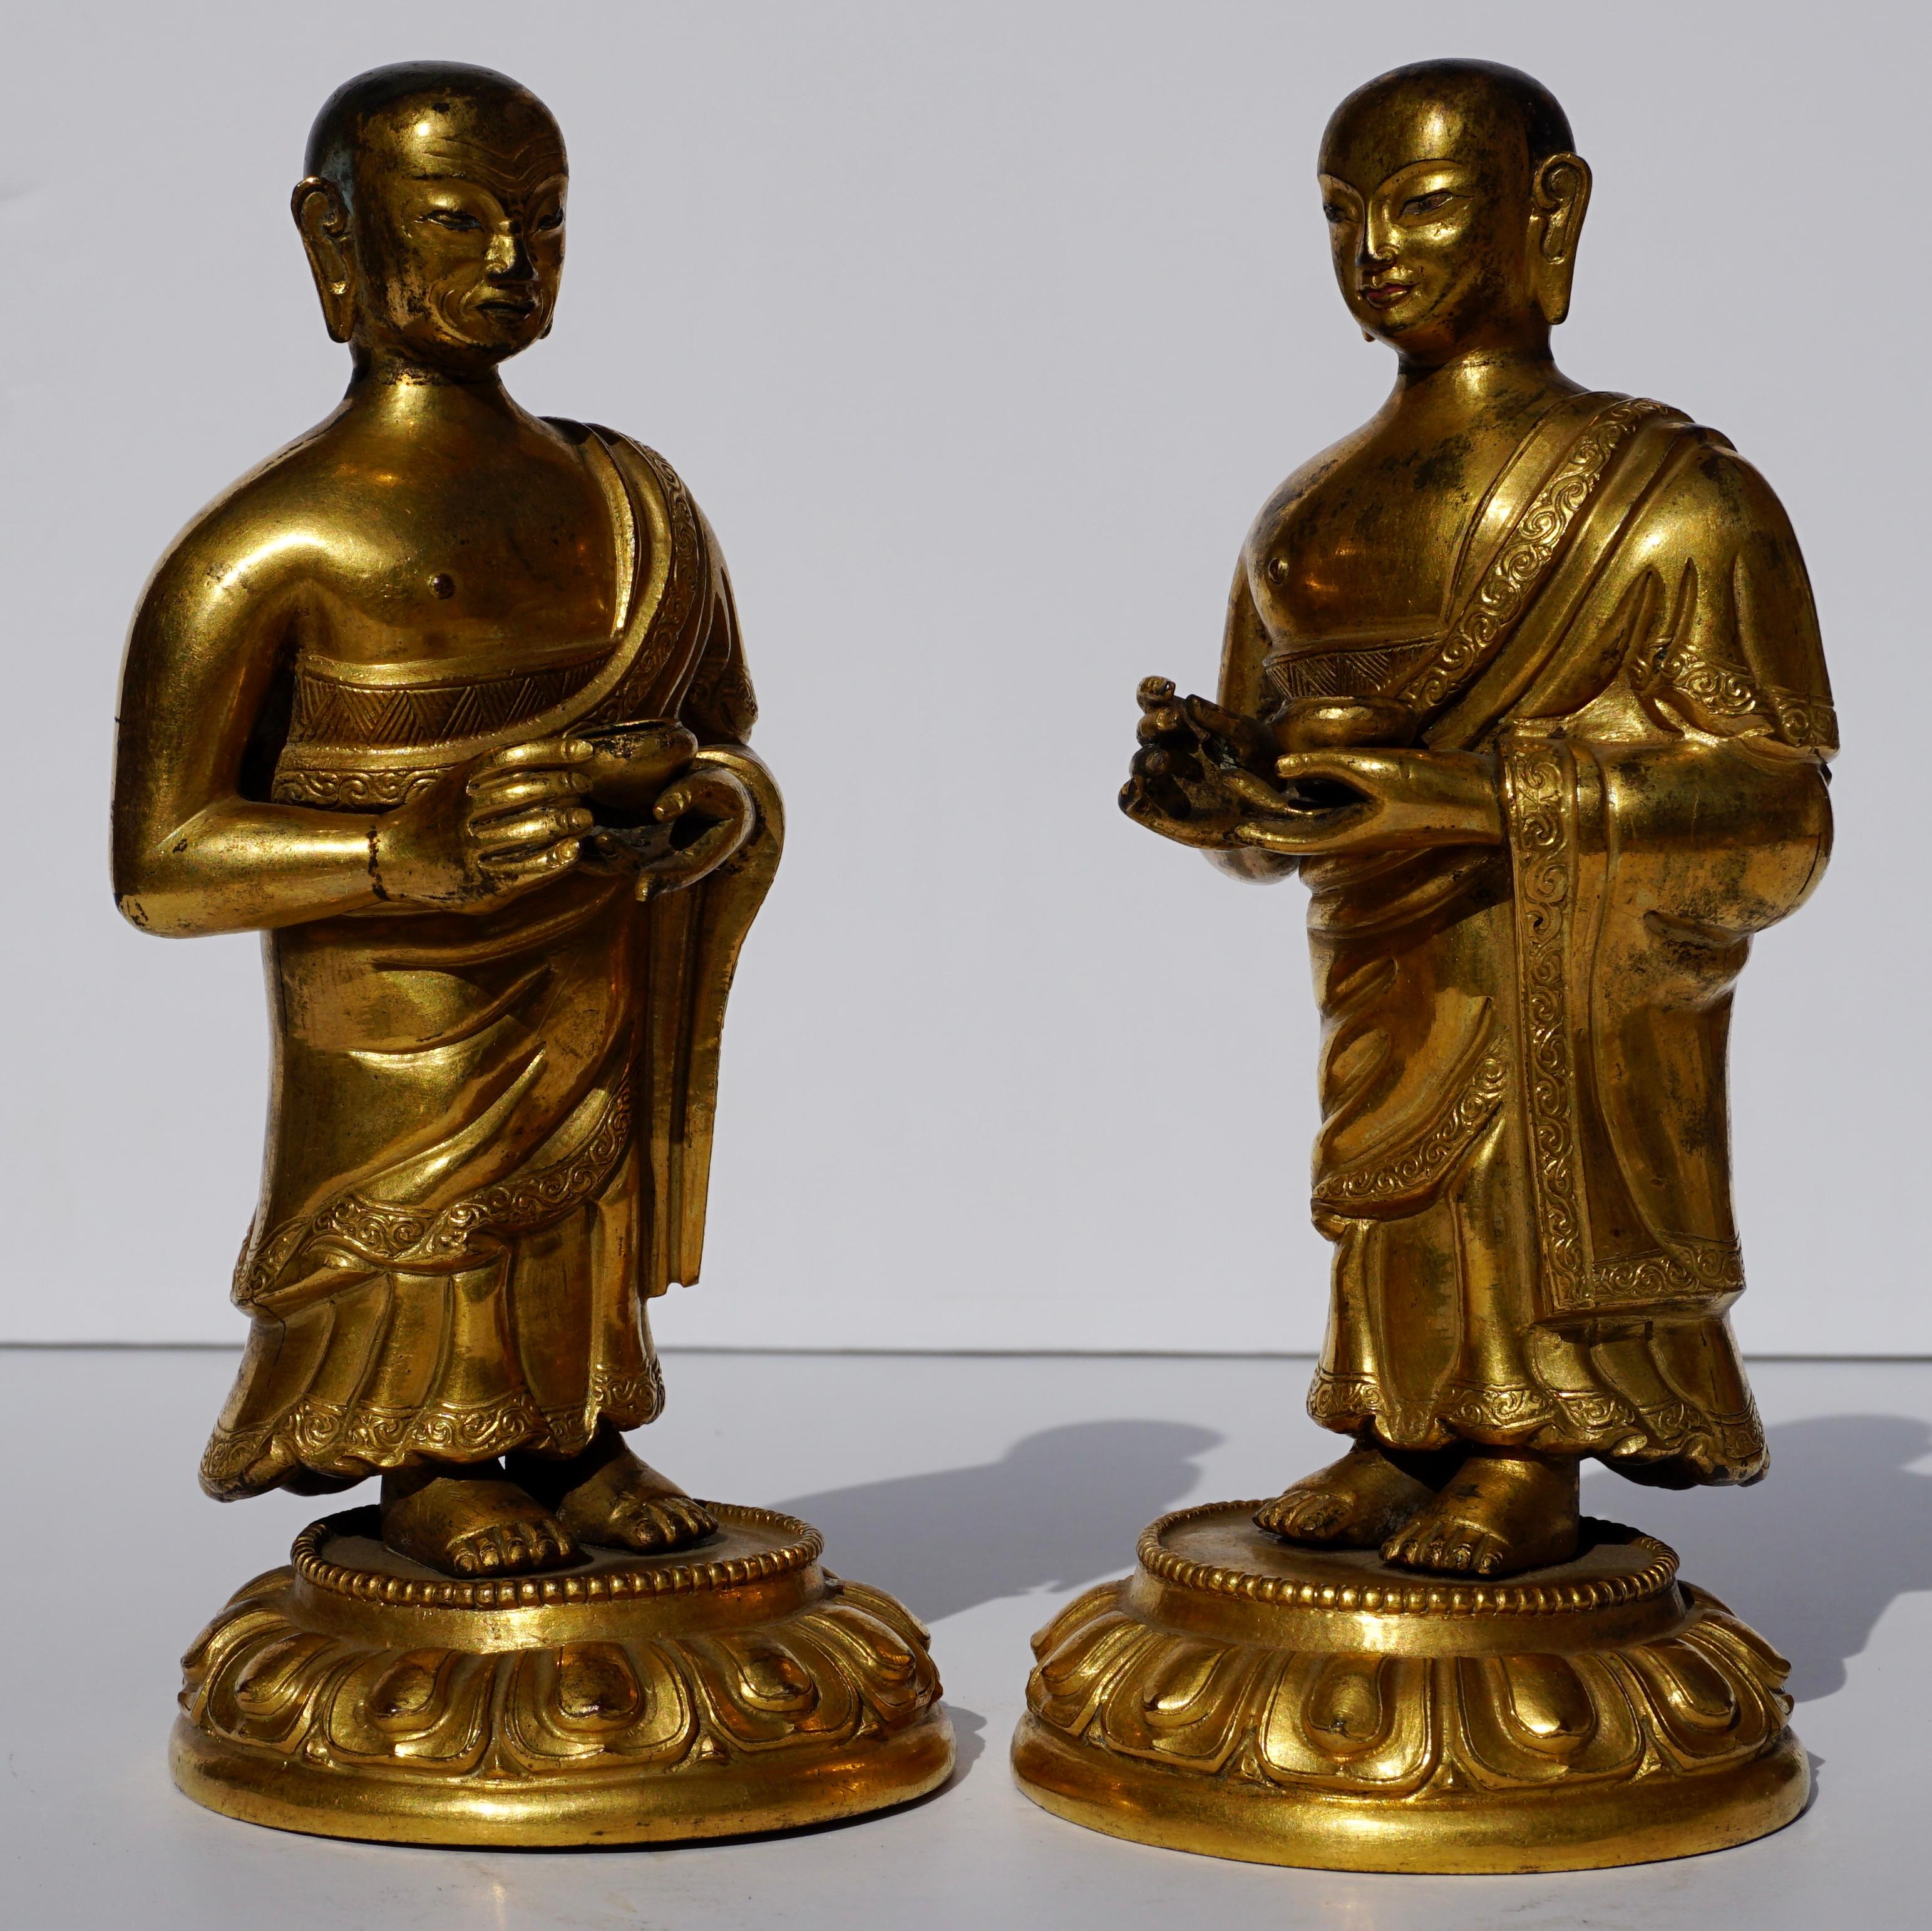 A rare pair of Sino-Tibetan gilt bronze and repousse Lama or Lohan standing figures. They are ceremoniously robed holding bowls in their left hands, They have different distinctive faces and the detailed repousse is outstanding. A real rarity to